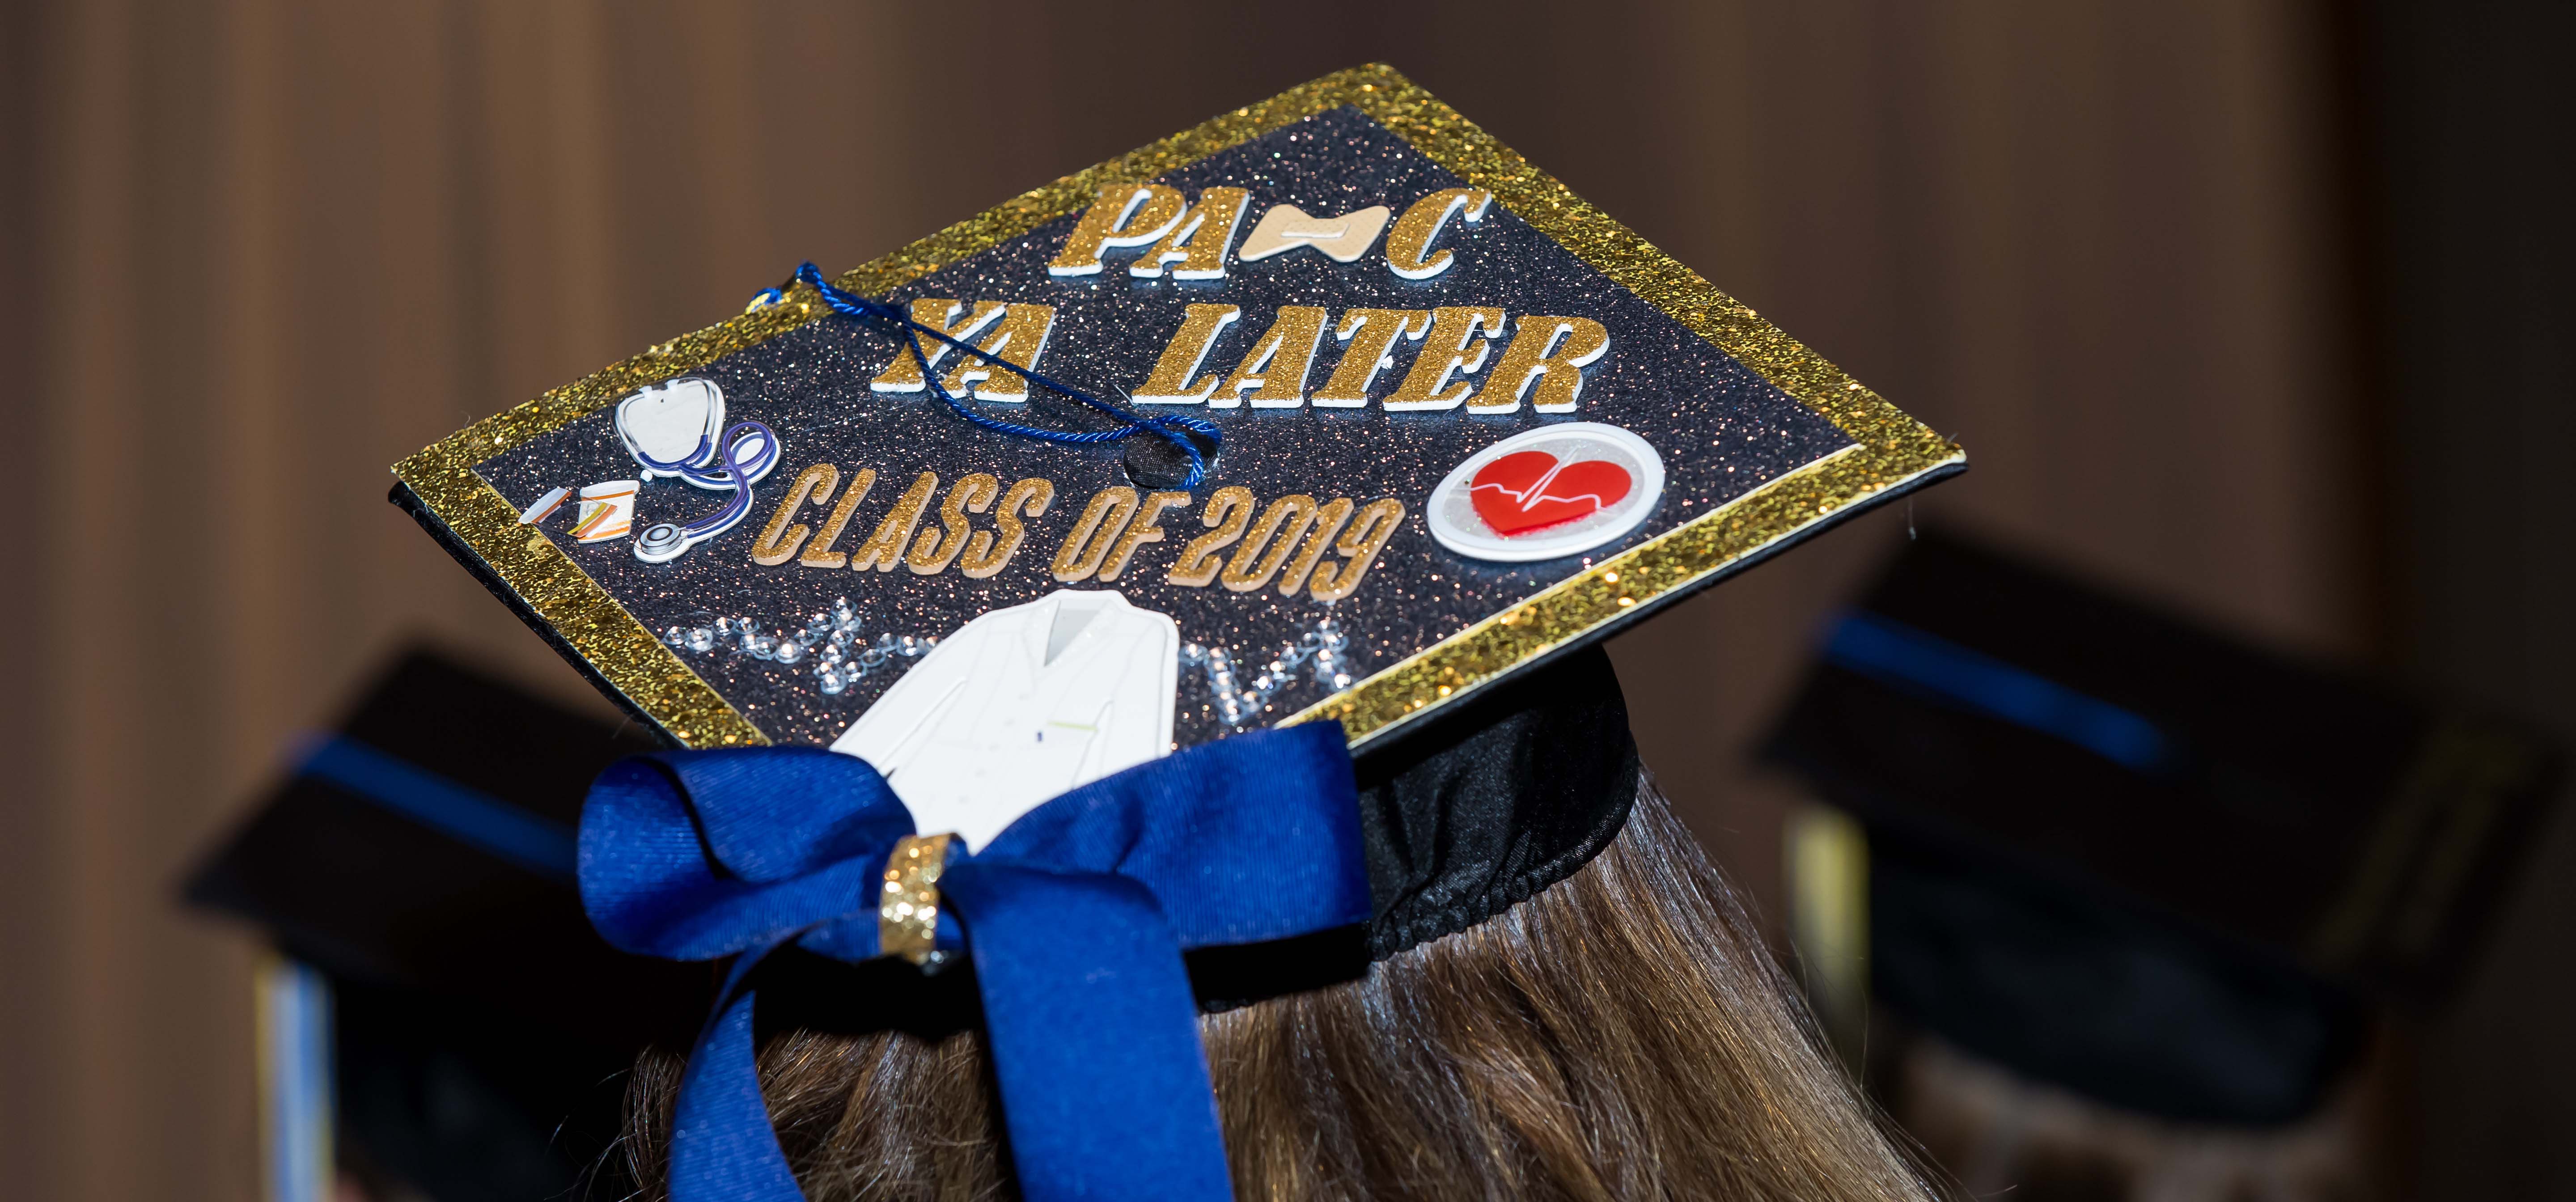 School of Physician Assistant Studies Graduation Cap from Winter Commencement 2019